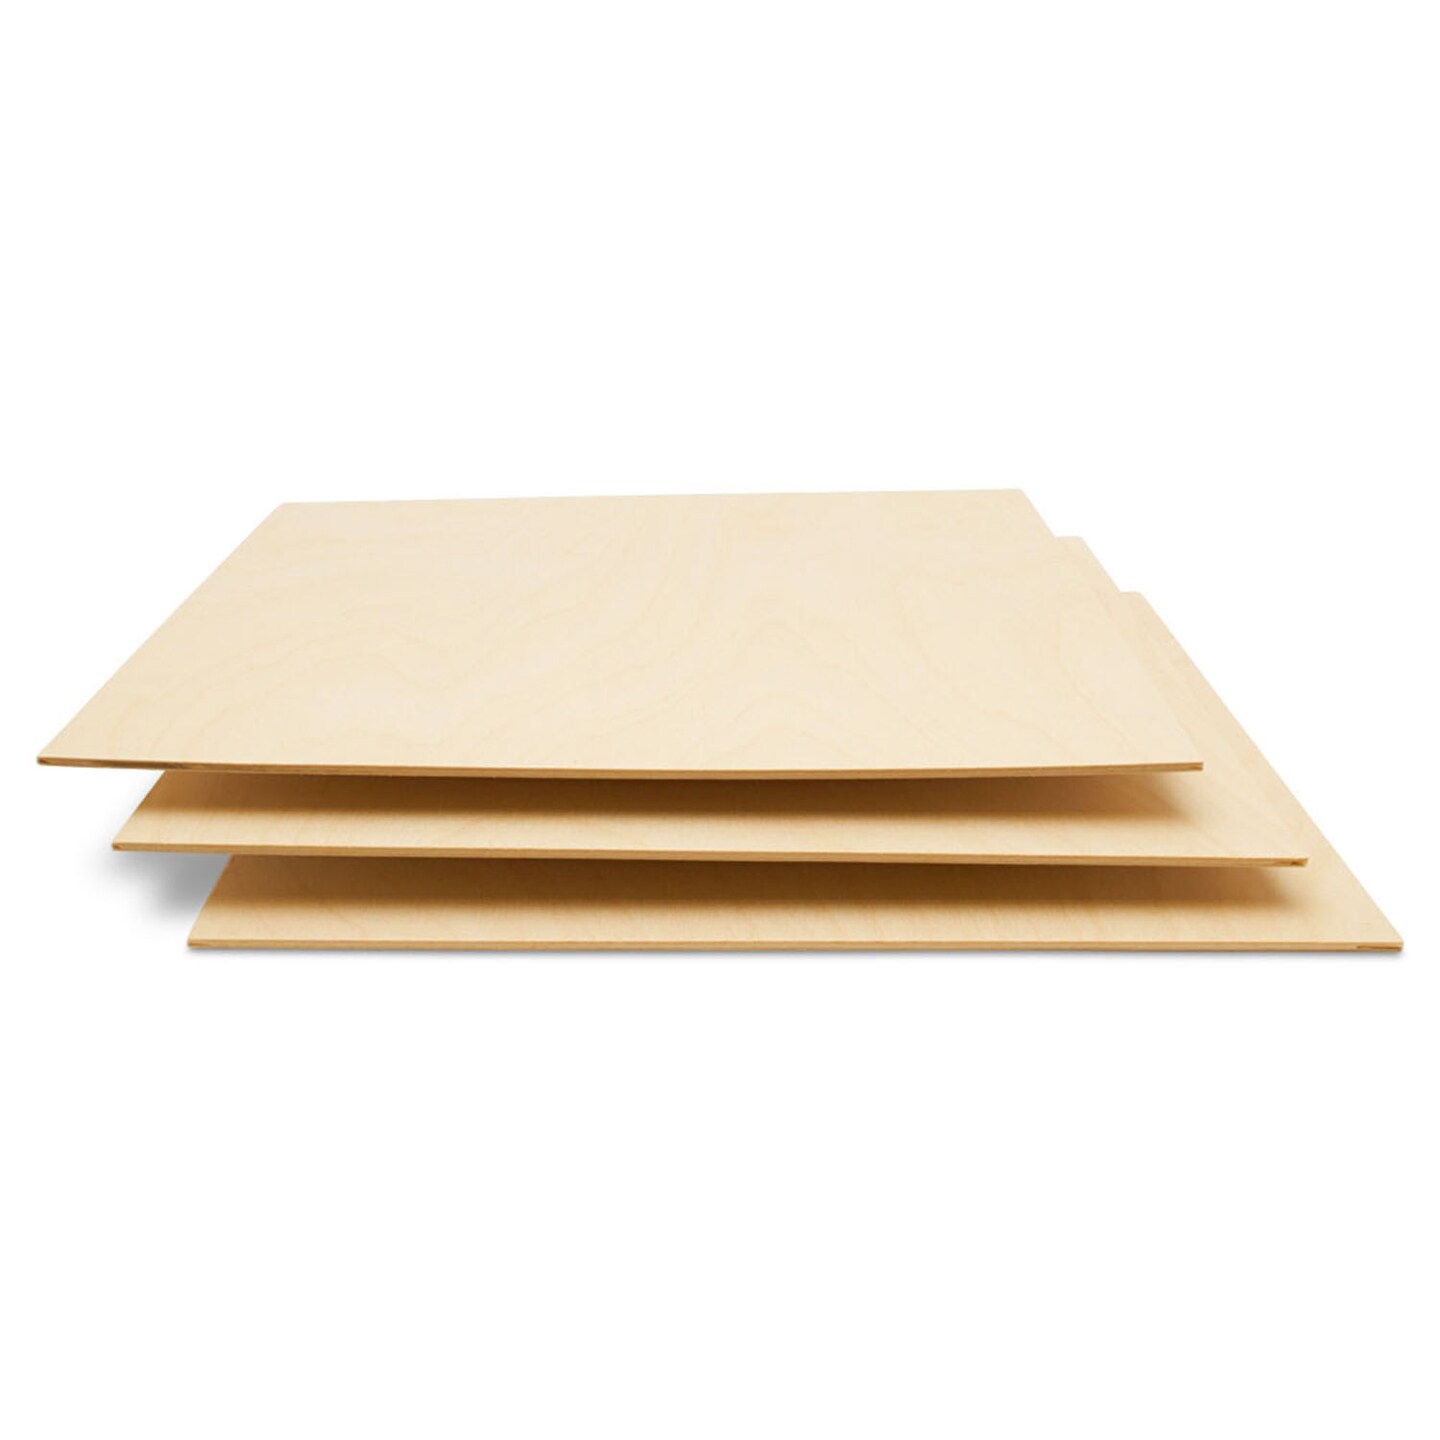 Baltic Birch Plywood, 10 x 10 Inch, B/BB Grade Sheets, 1/4 or 1/8 Inch Thick| Woodpeckers